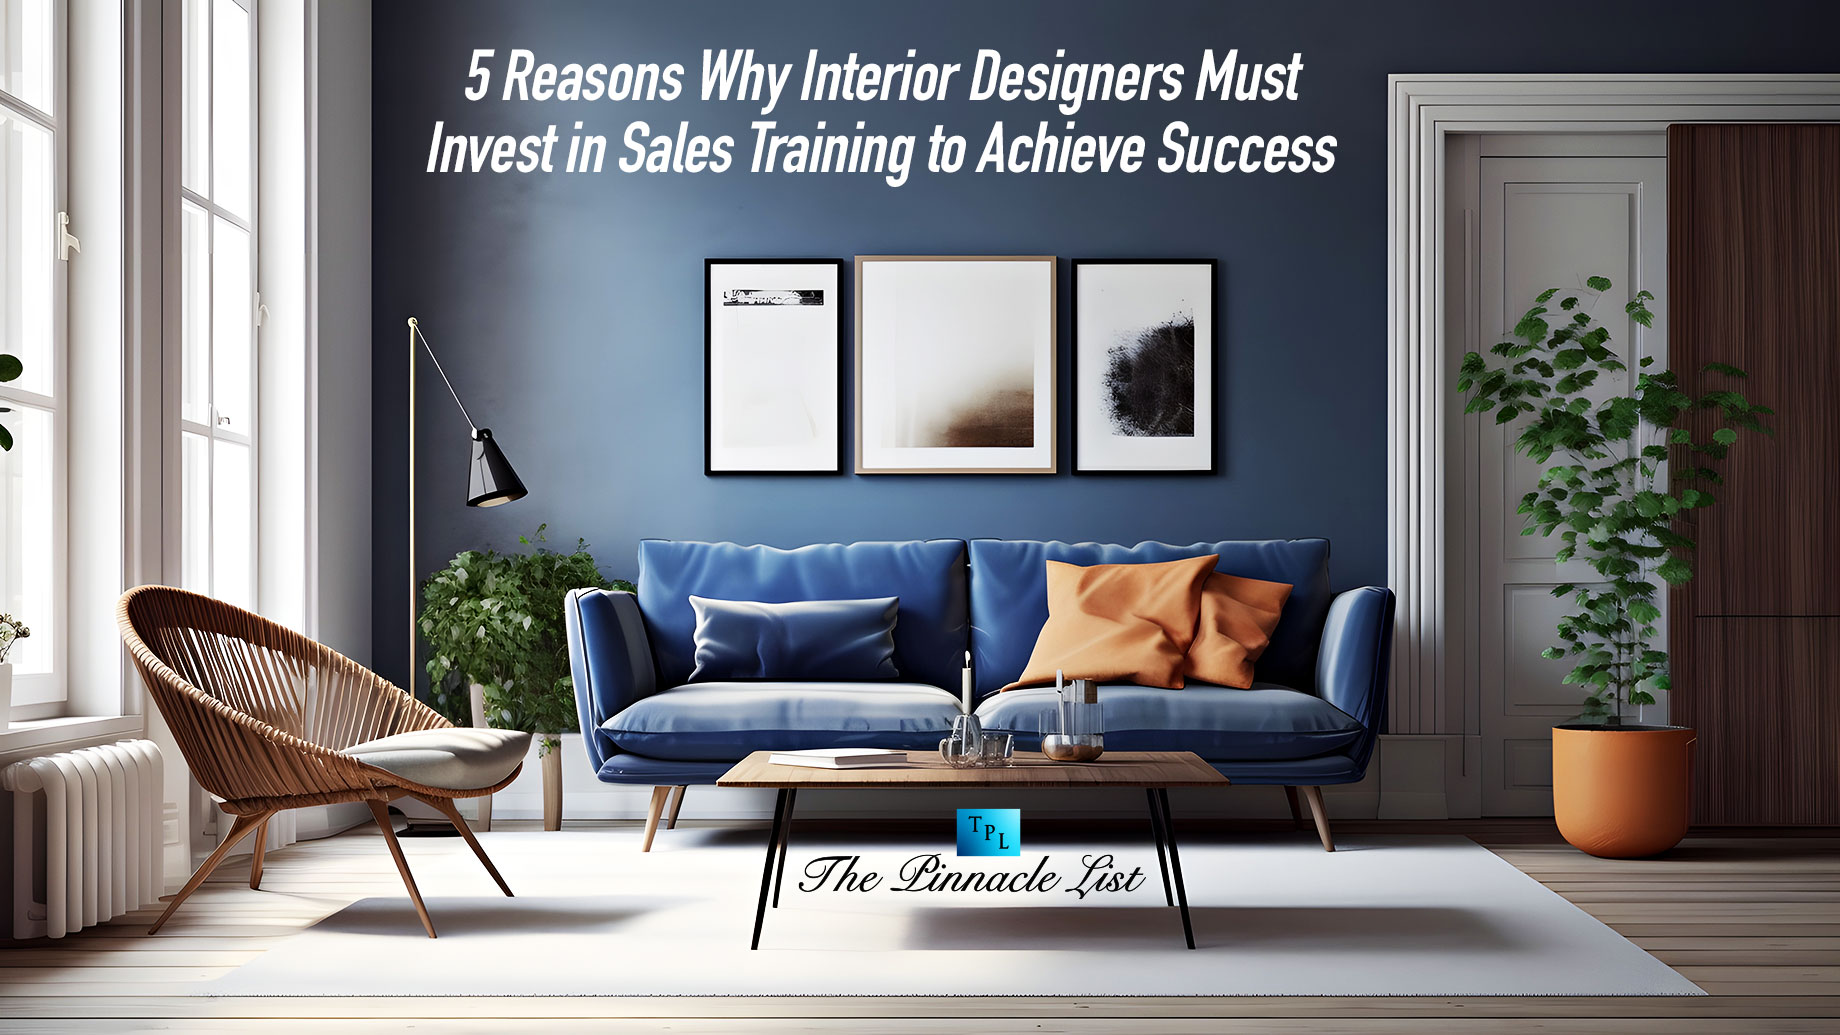 5 Reasons Why Interior Designers Must Invest in Sales Training to Achieve Success